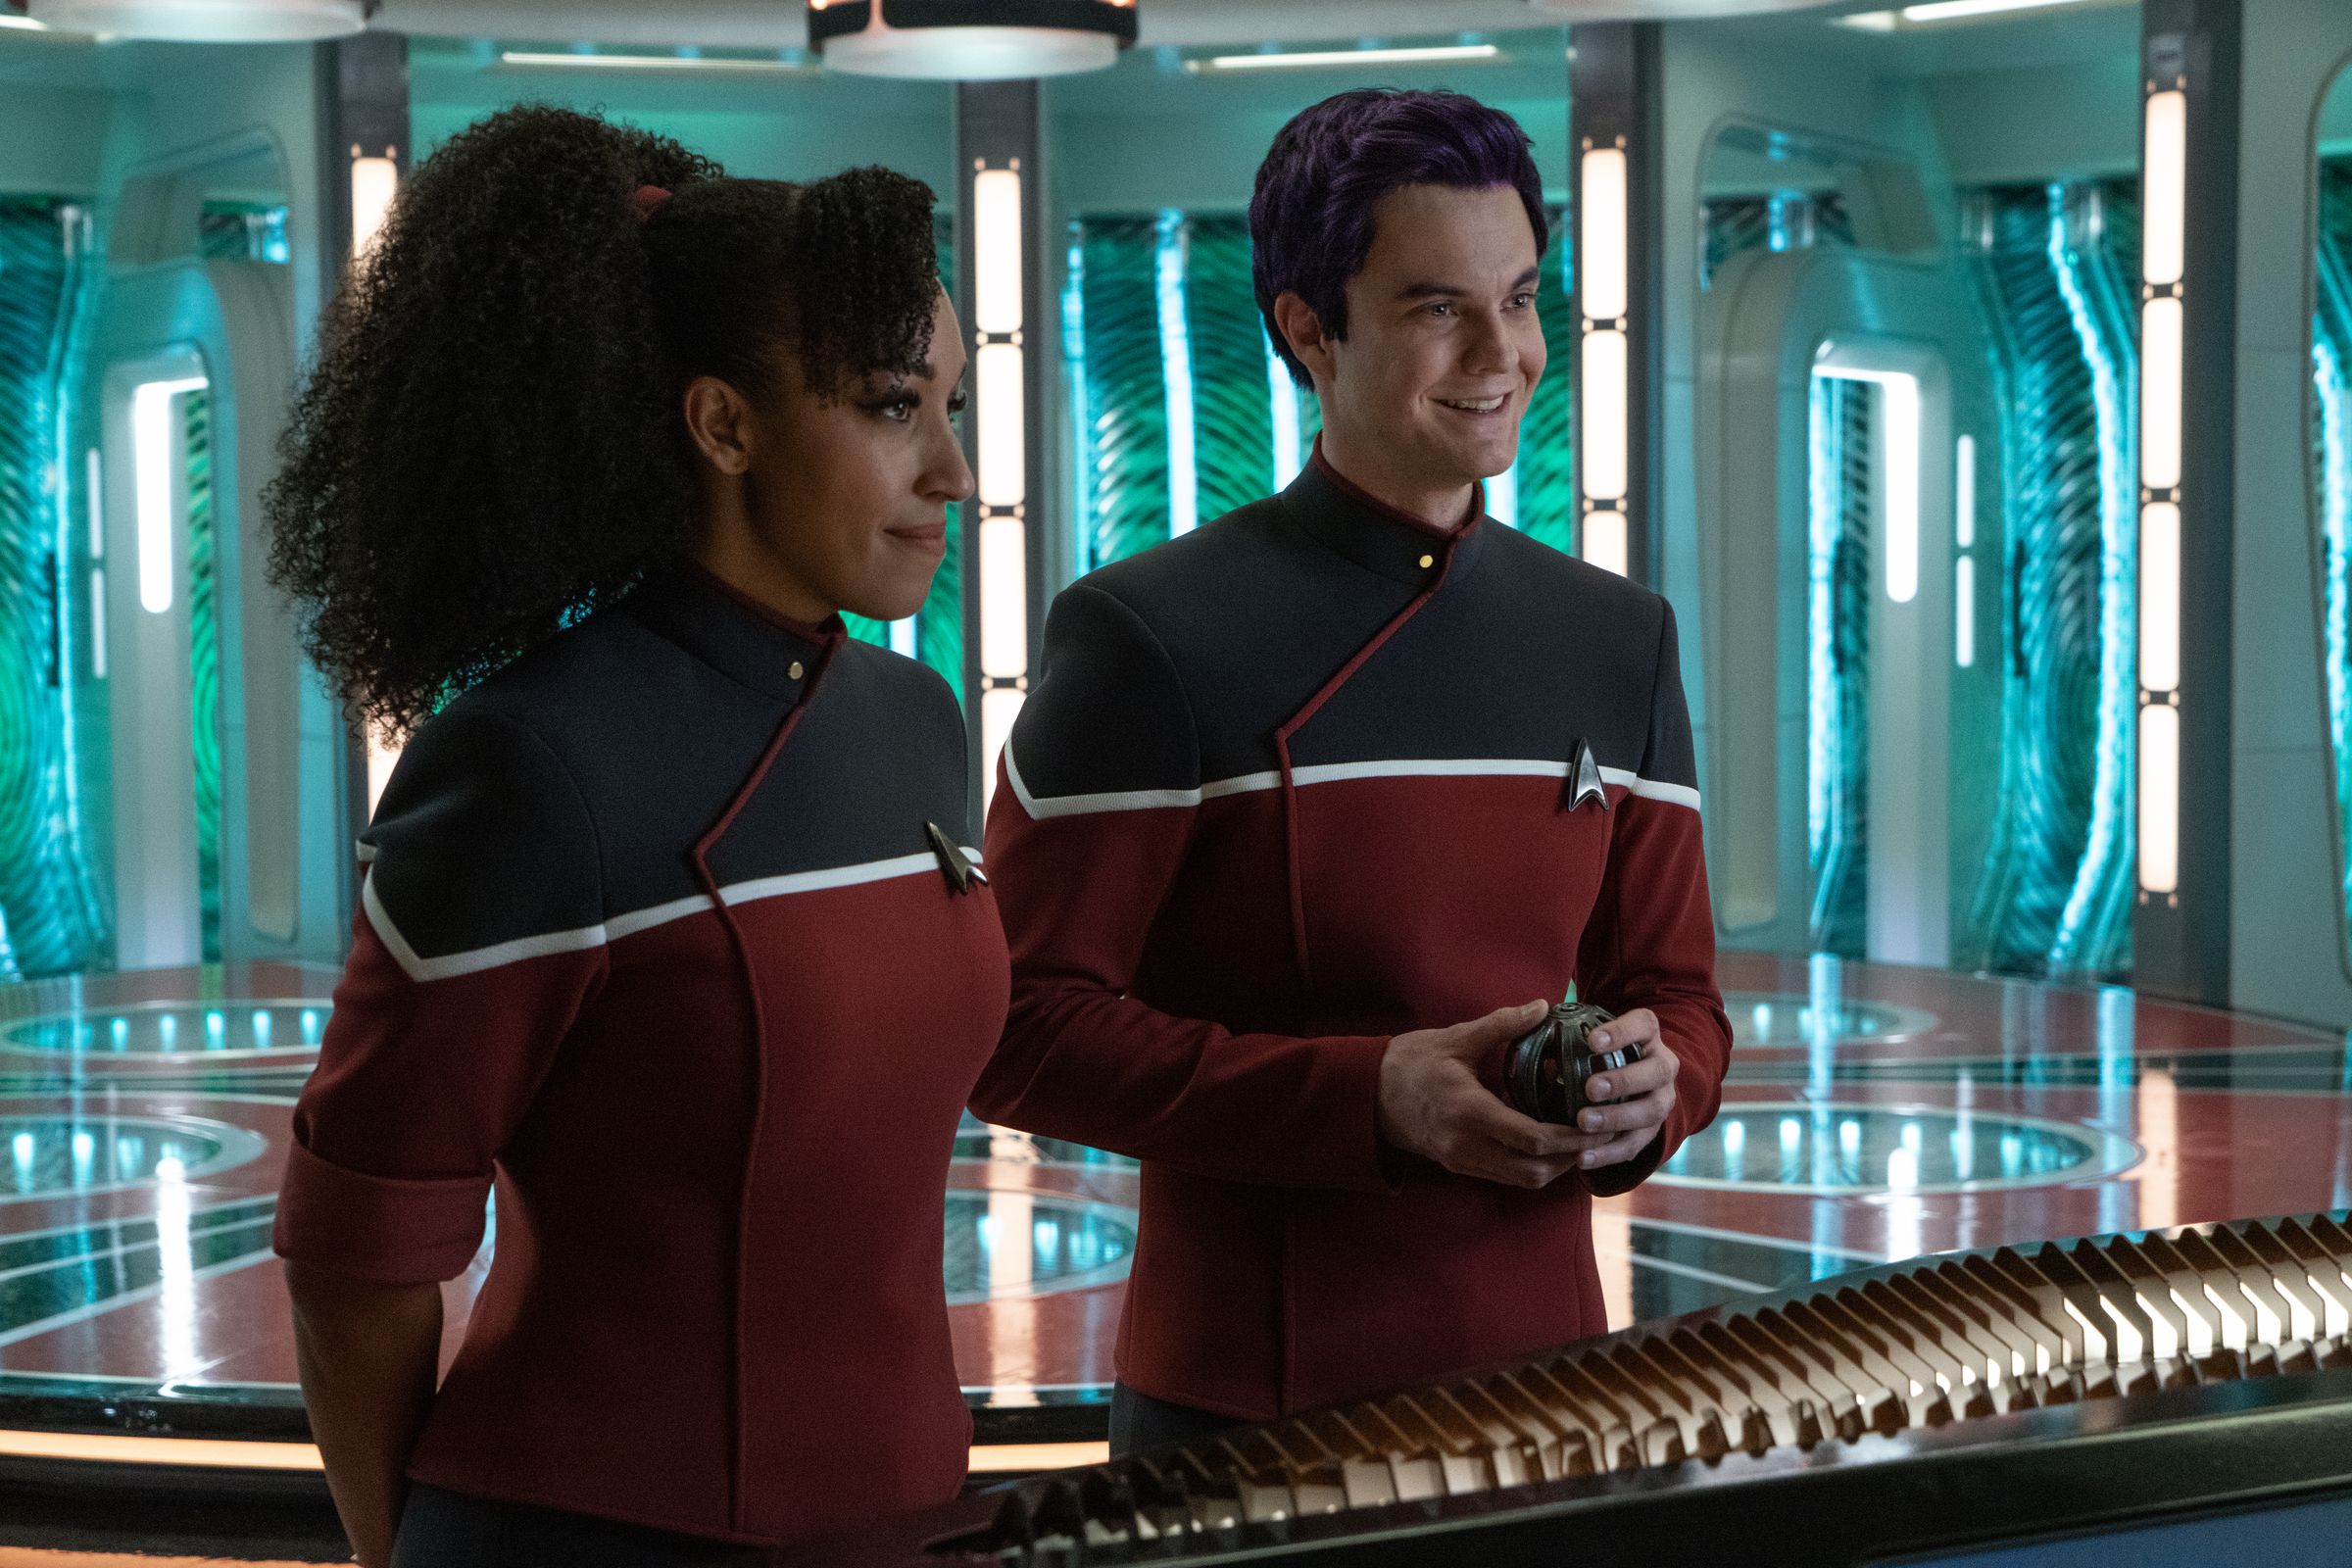 An image of a Black woman with her hair in a ponytail and a white man, with purple hair. They are standing in the transporter room of a Star Trek set and wearing black and red uniforms.